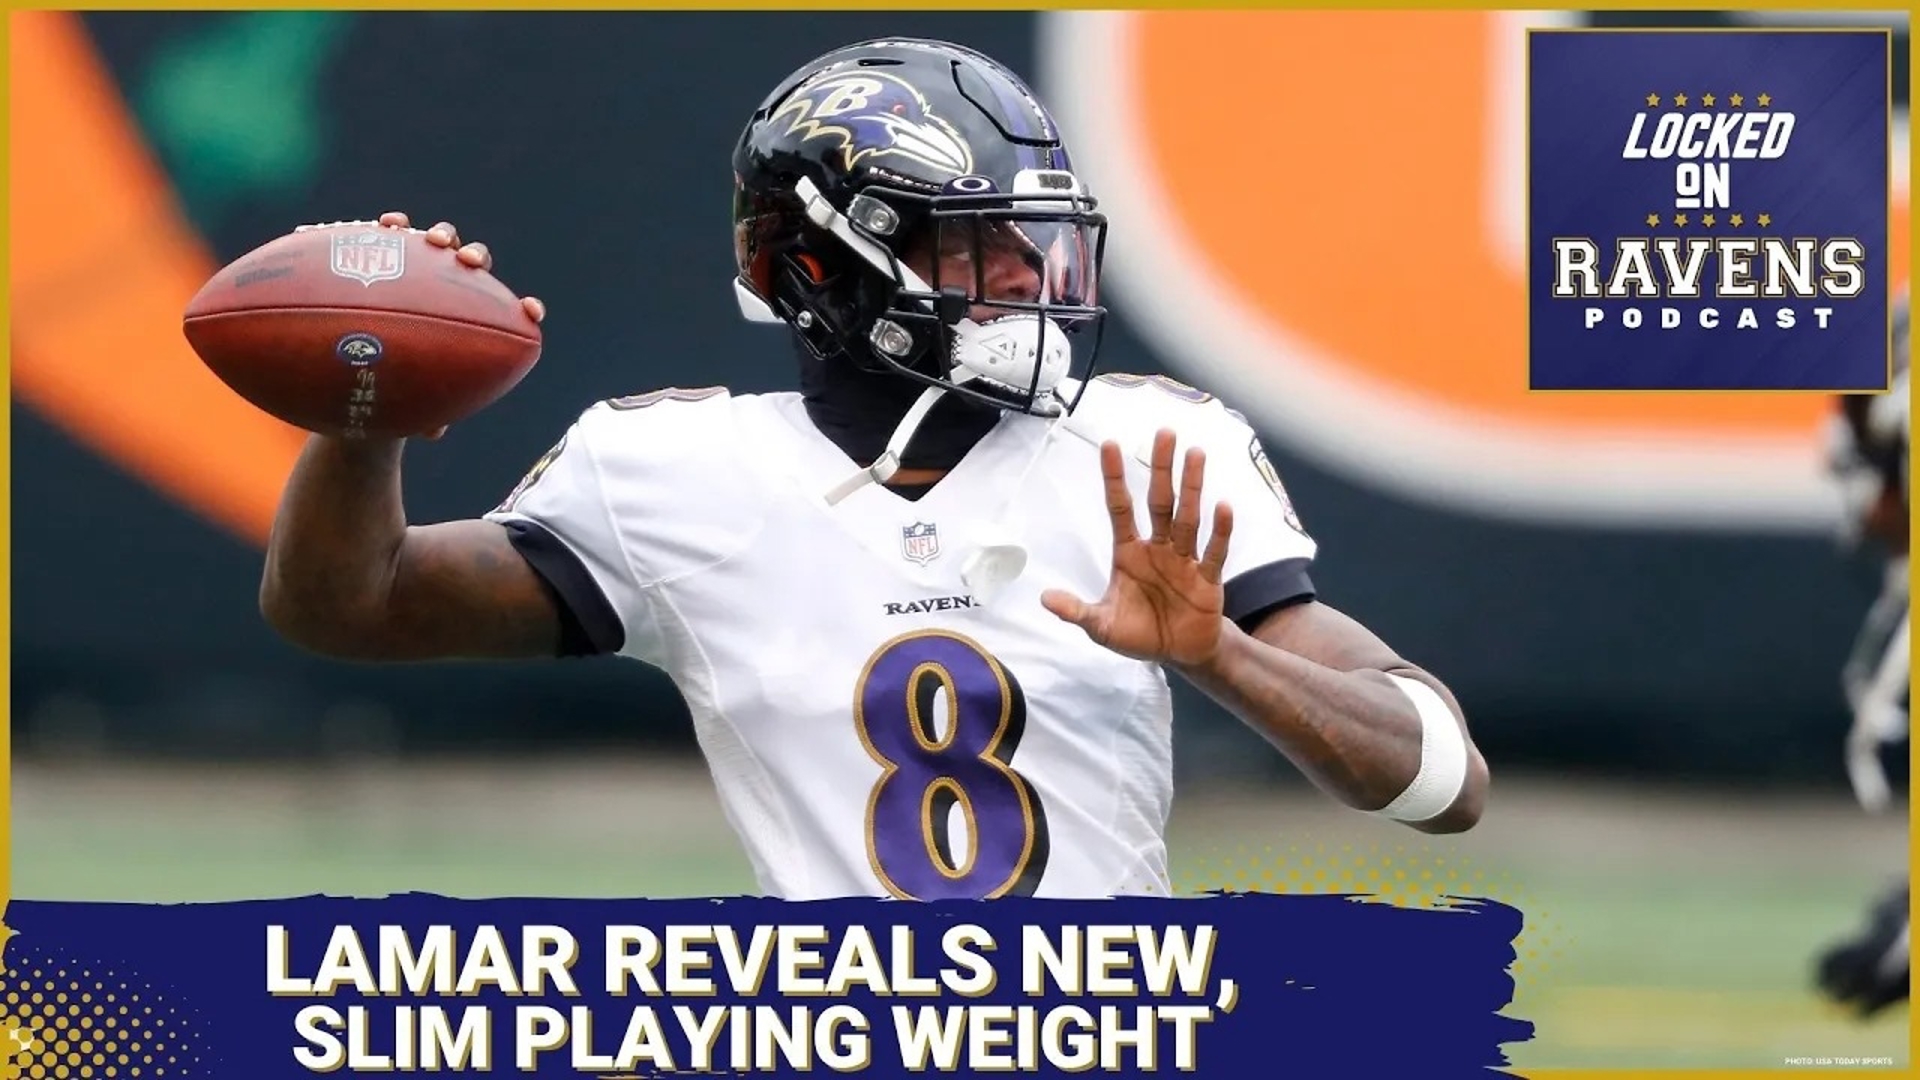 We look at the new slim current playing weight of Baltimore Ravens quarterback Lamar Jackson, discussing if it means a big 2024 season is incoming and more.